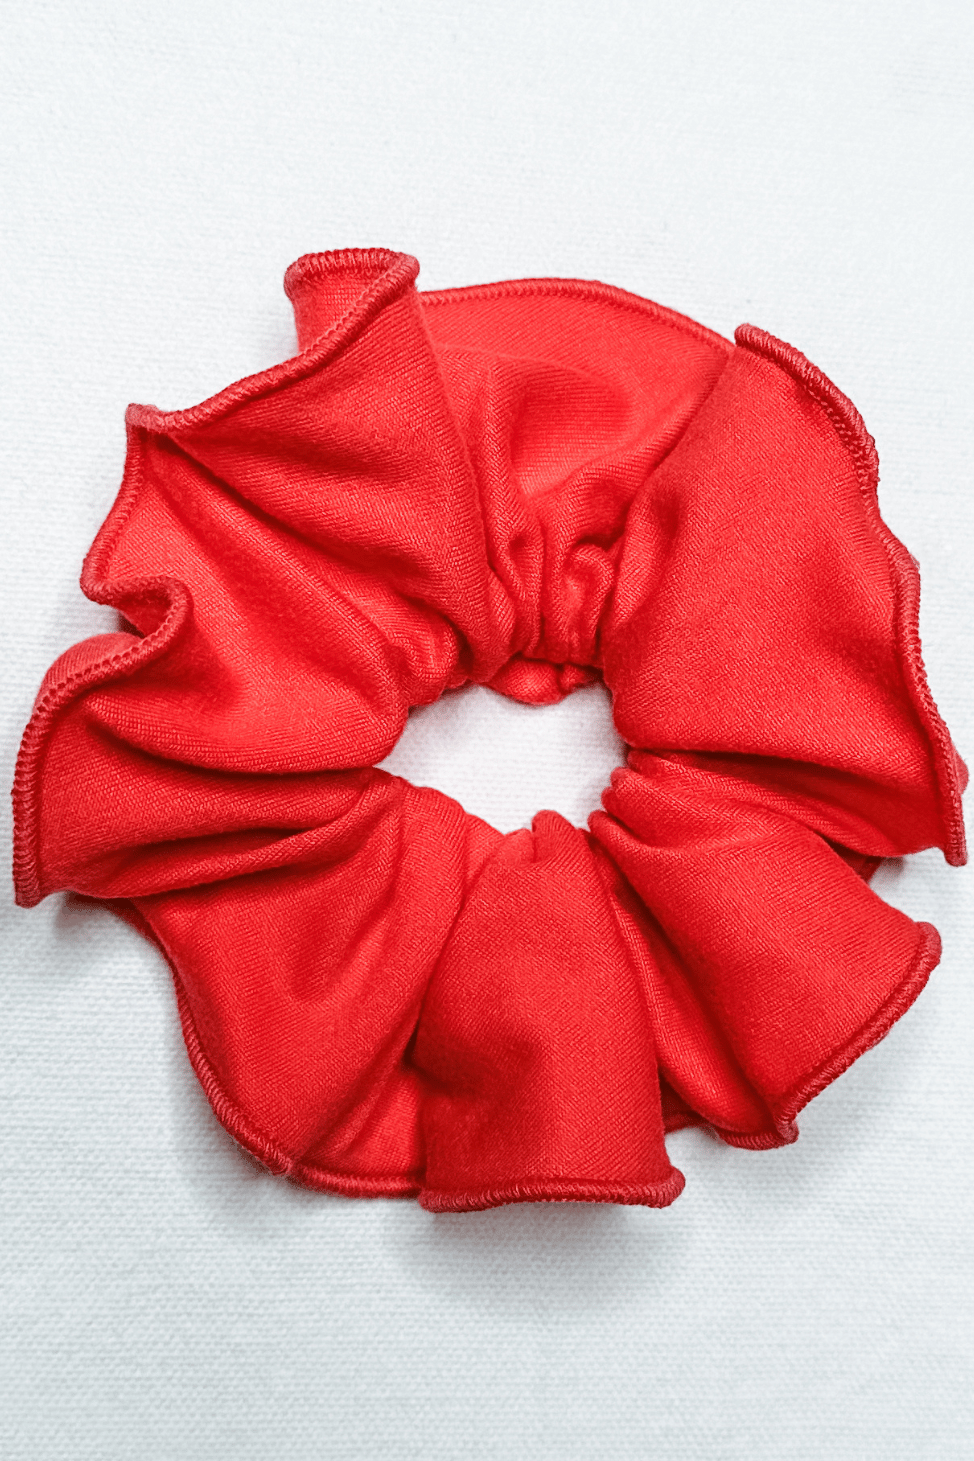 Scrunchie in Red color from Diane Kroe